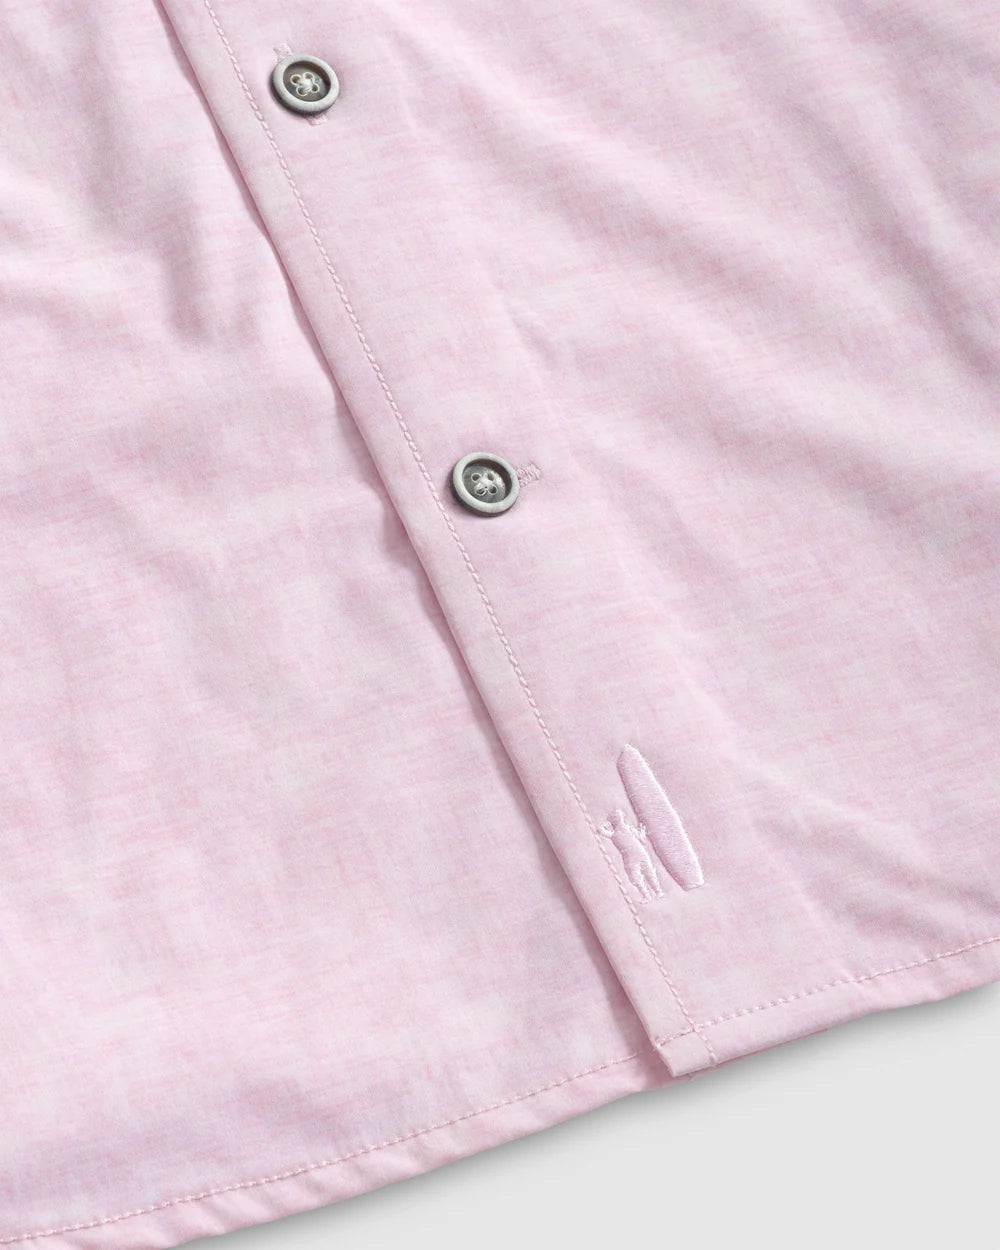 Designed to sit untucked, this shirt is cut like a button-up but with the fabric of a polo so you can take some of that performance comfort and blend it with some jeans or board shorts.